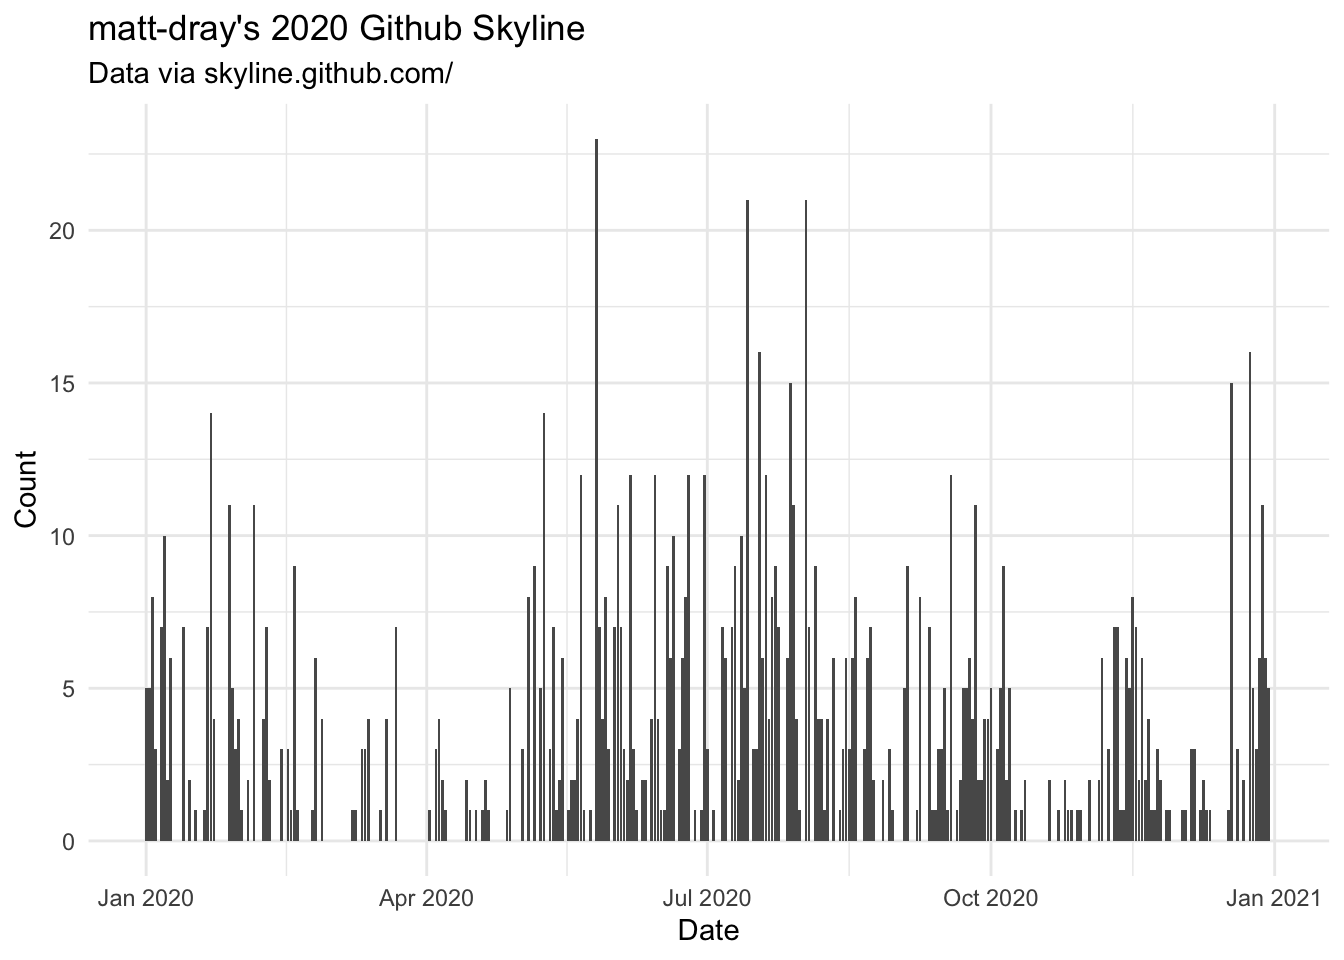 A bar chart of contributions to GitHub in 2020 by user matt-dray, which peaks in the summer months.